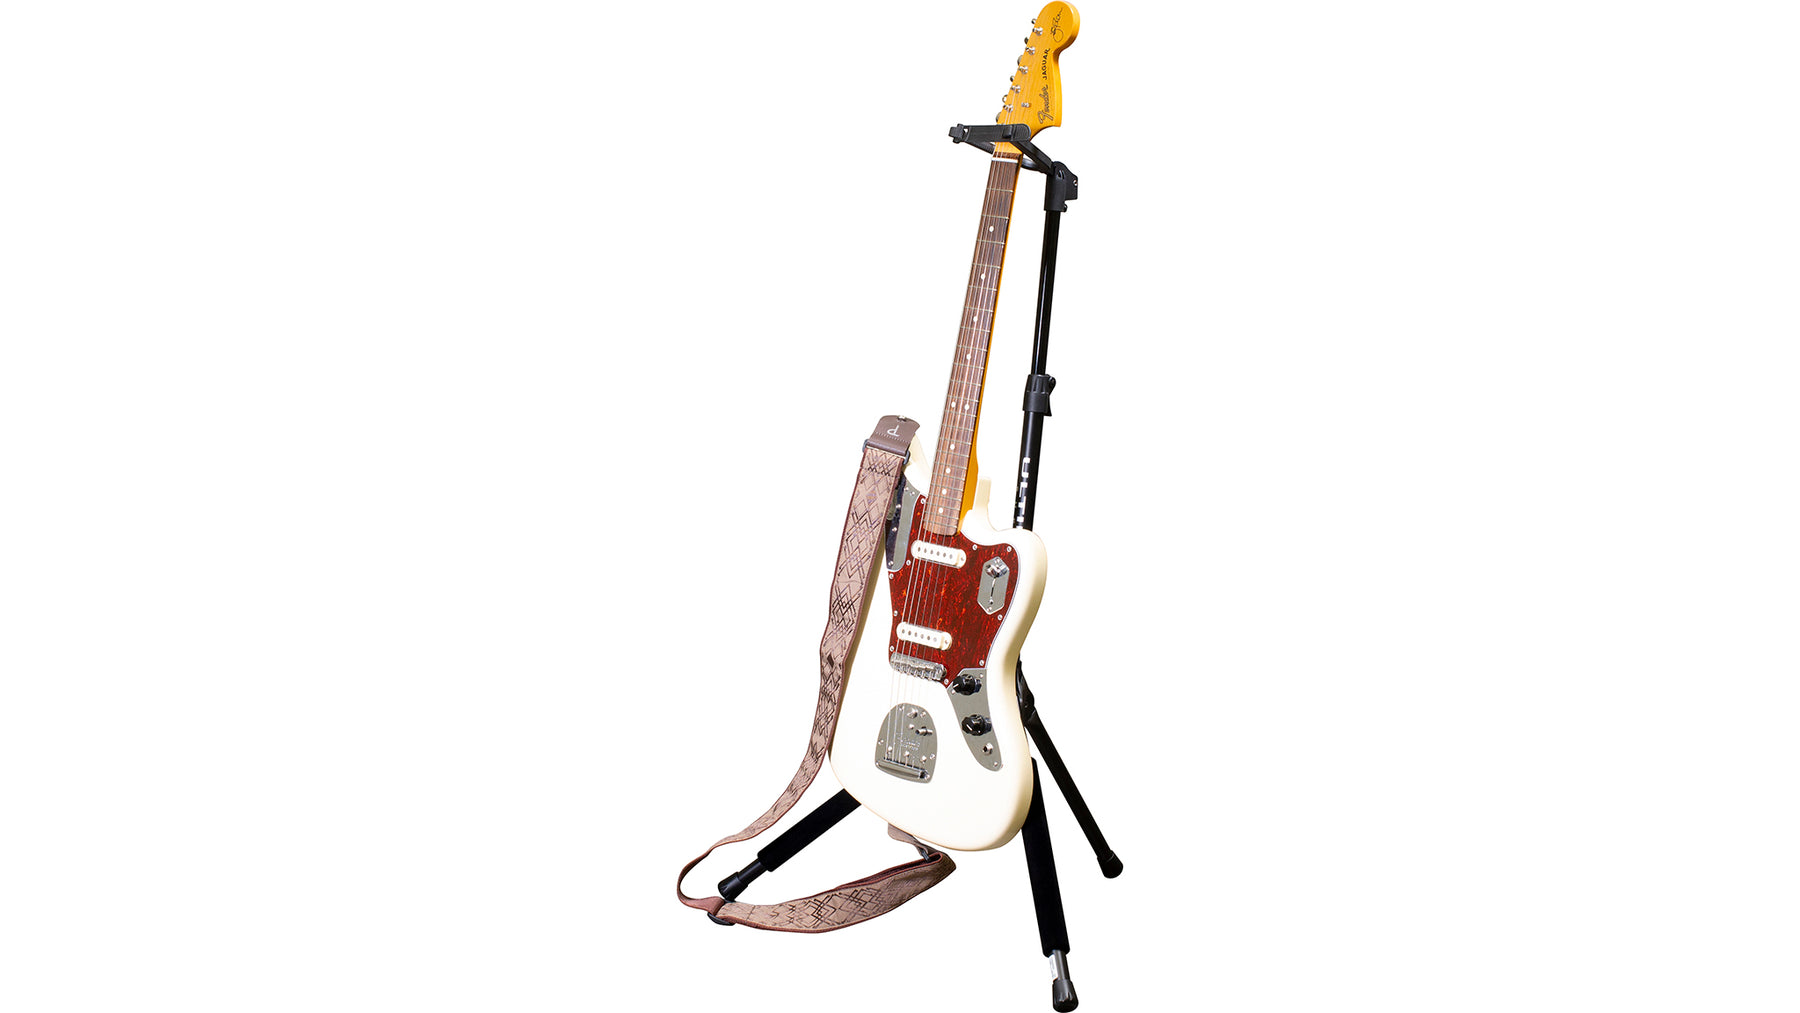 Classic Cantabile GS 100 Stage Guitar Stand